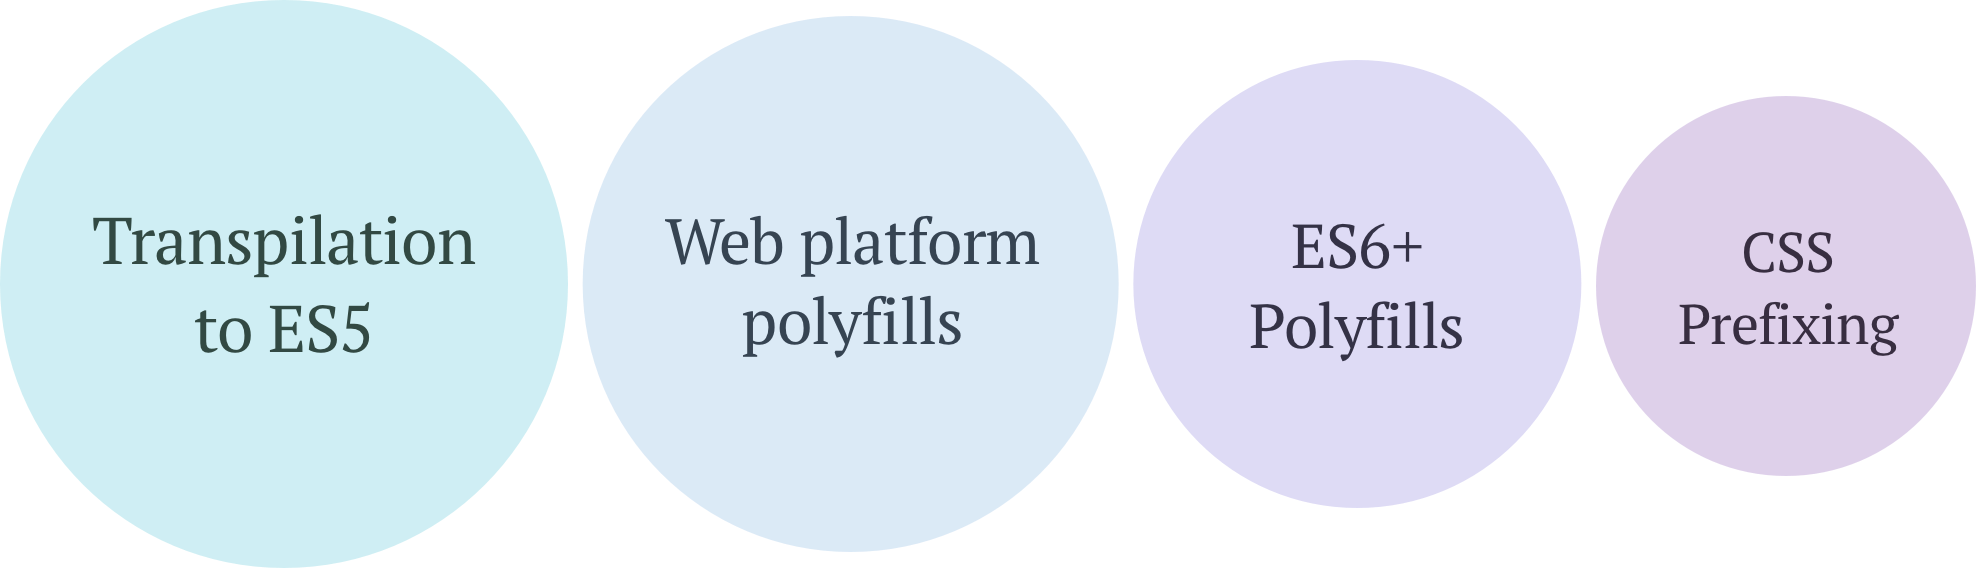 The different compatibility layers of a web app.